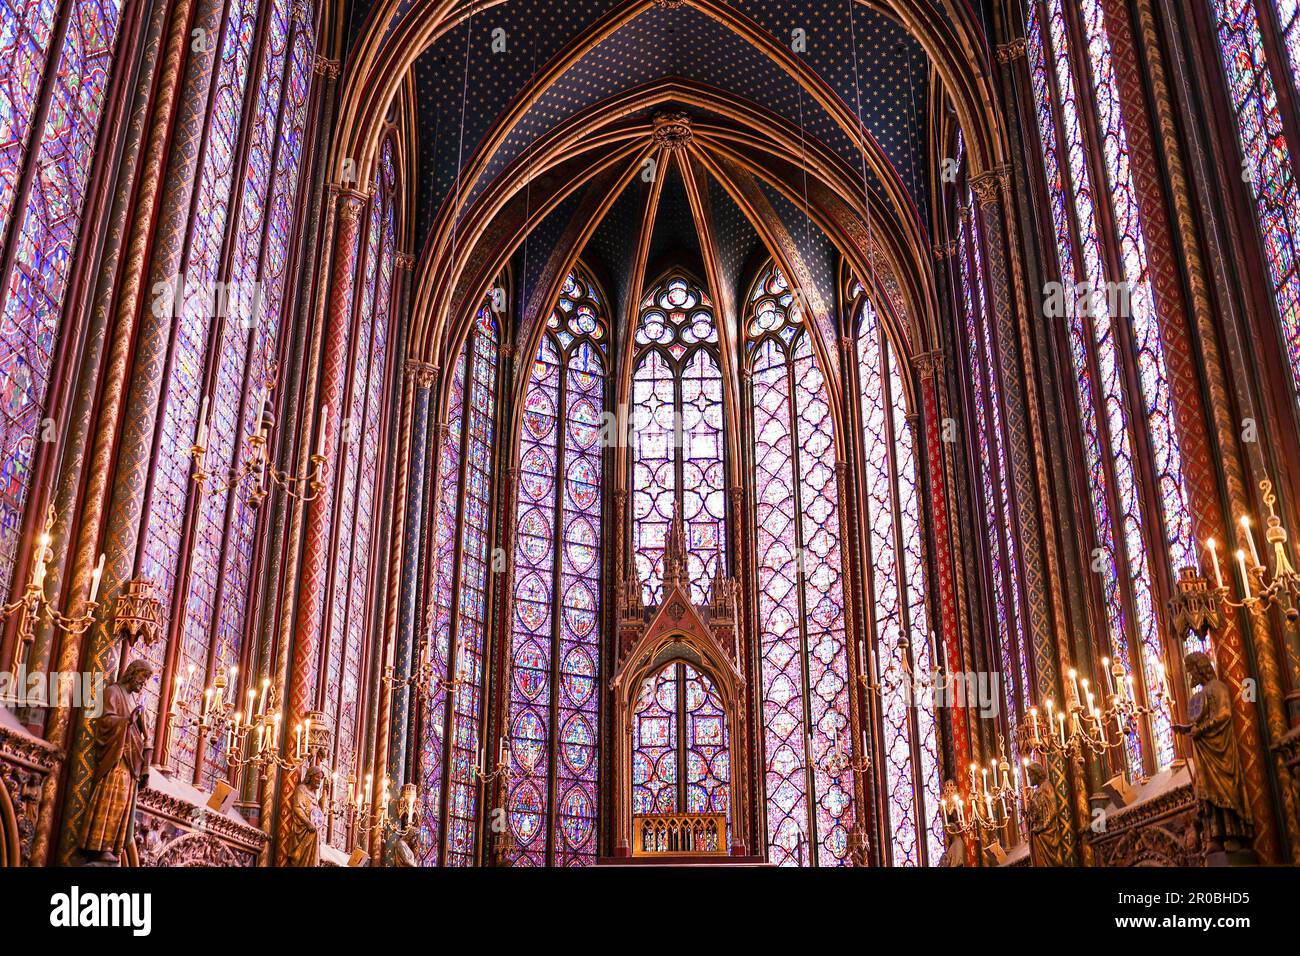 Interior View of Sainte-Chapelle, a Gothic Style Royal Chapel in the Centre of Paris. Stock Photo